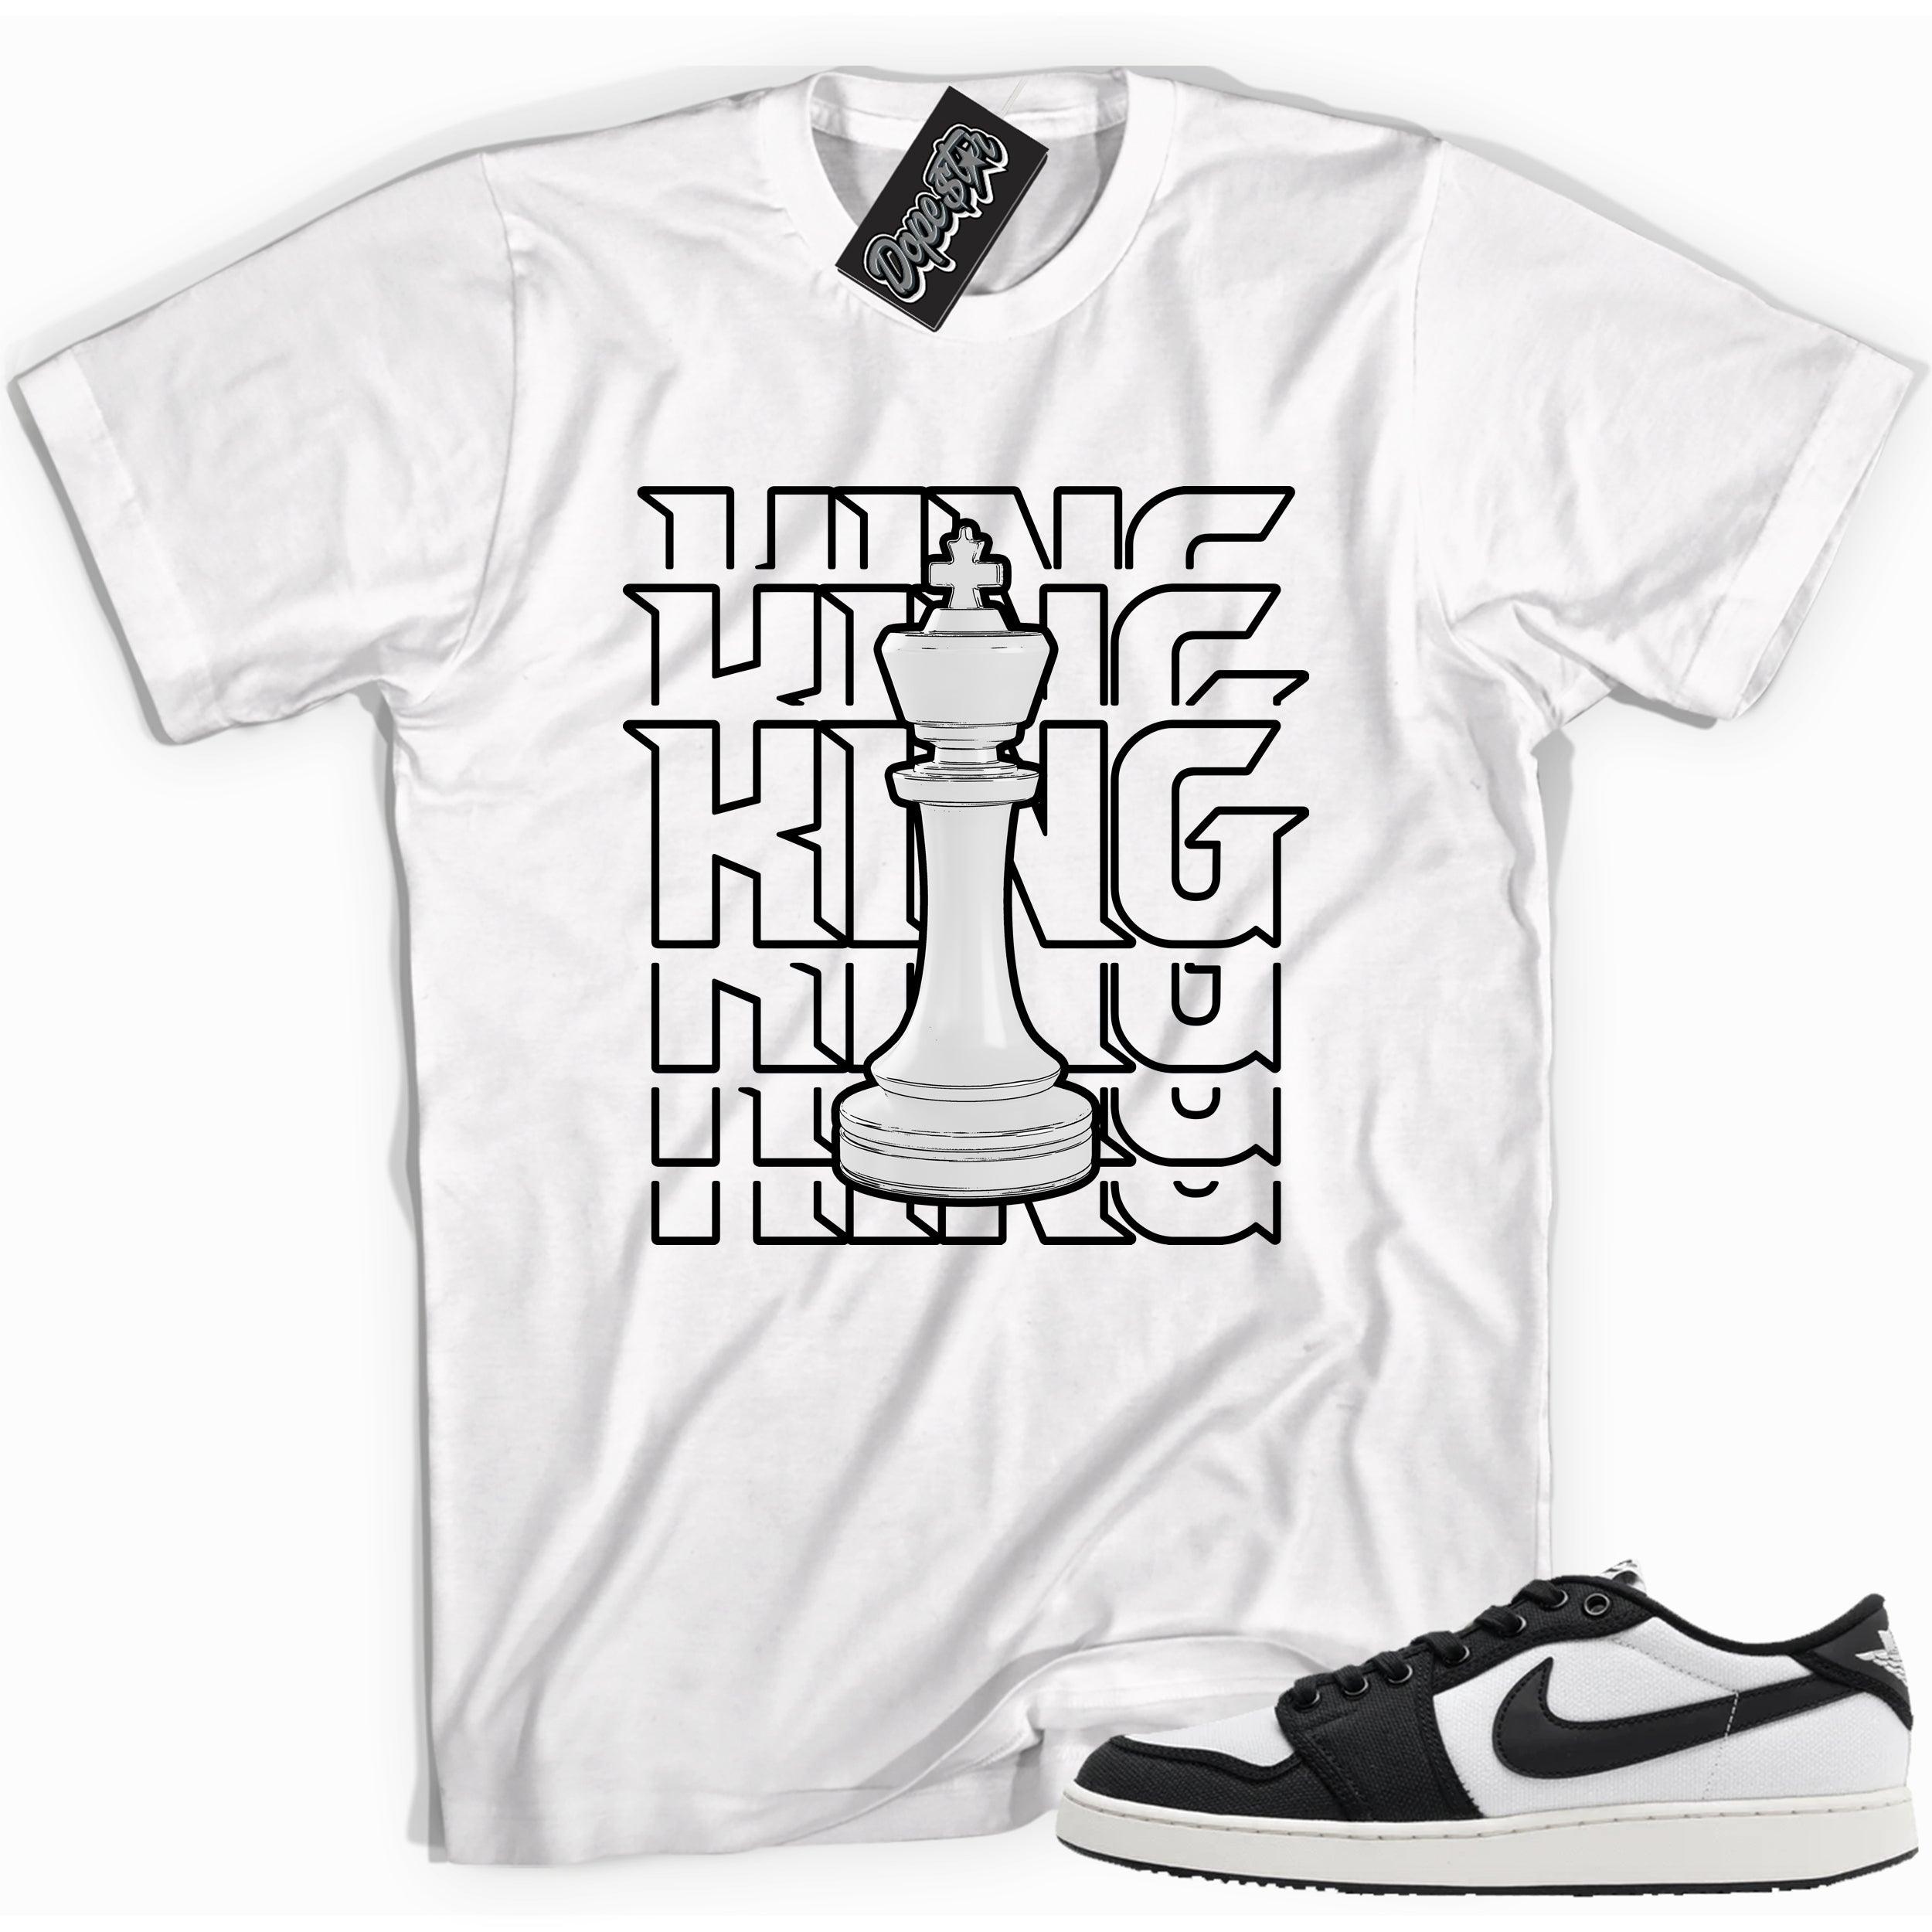 Cool white graphic tee with 'king' print, that perfectly matches Air Jordan 1 Retro Ajko Low Black & White sneakers.